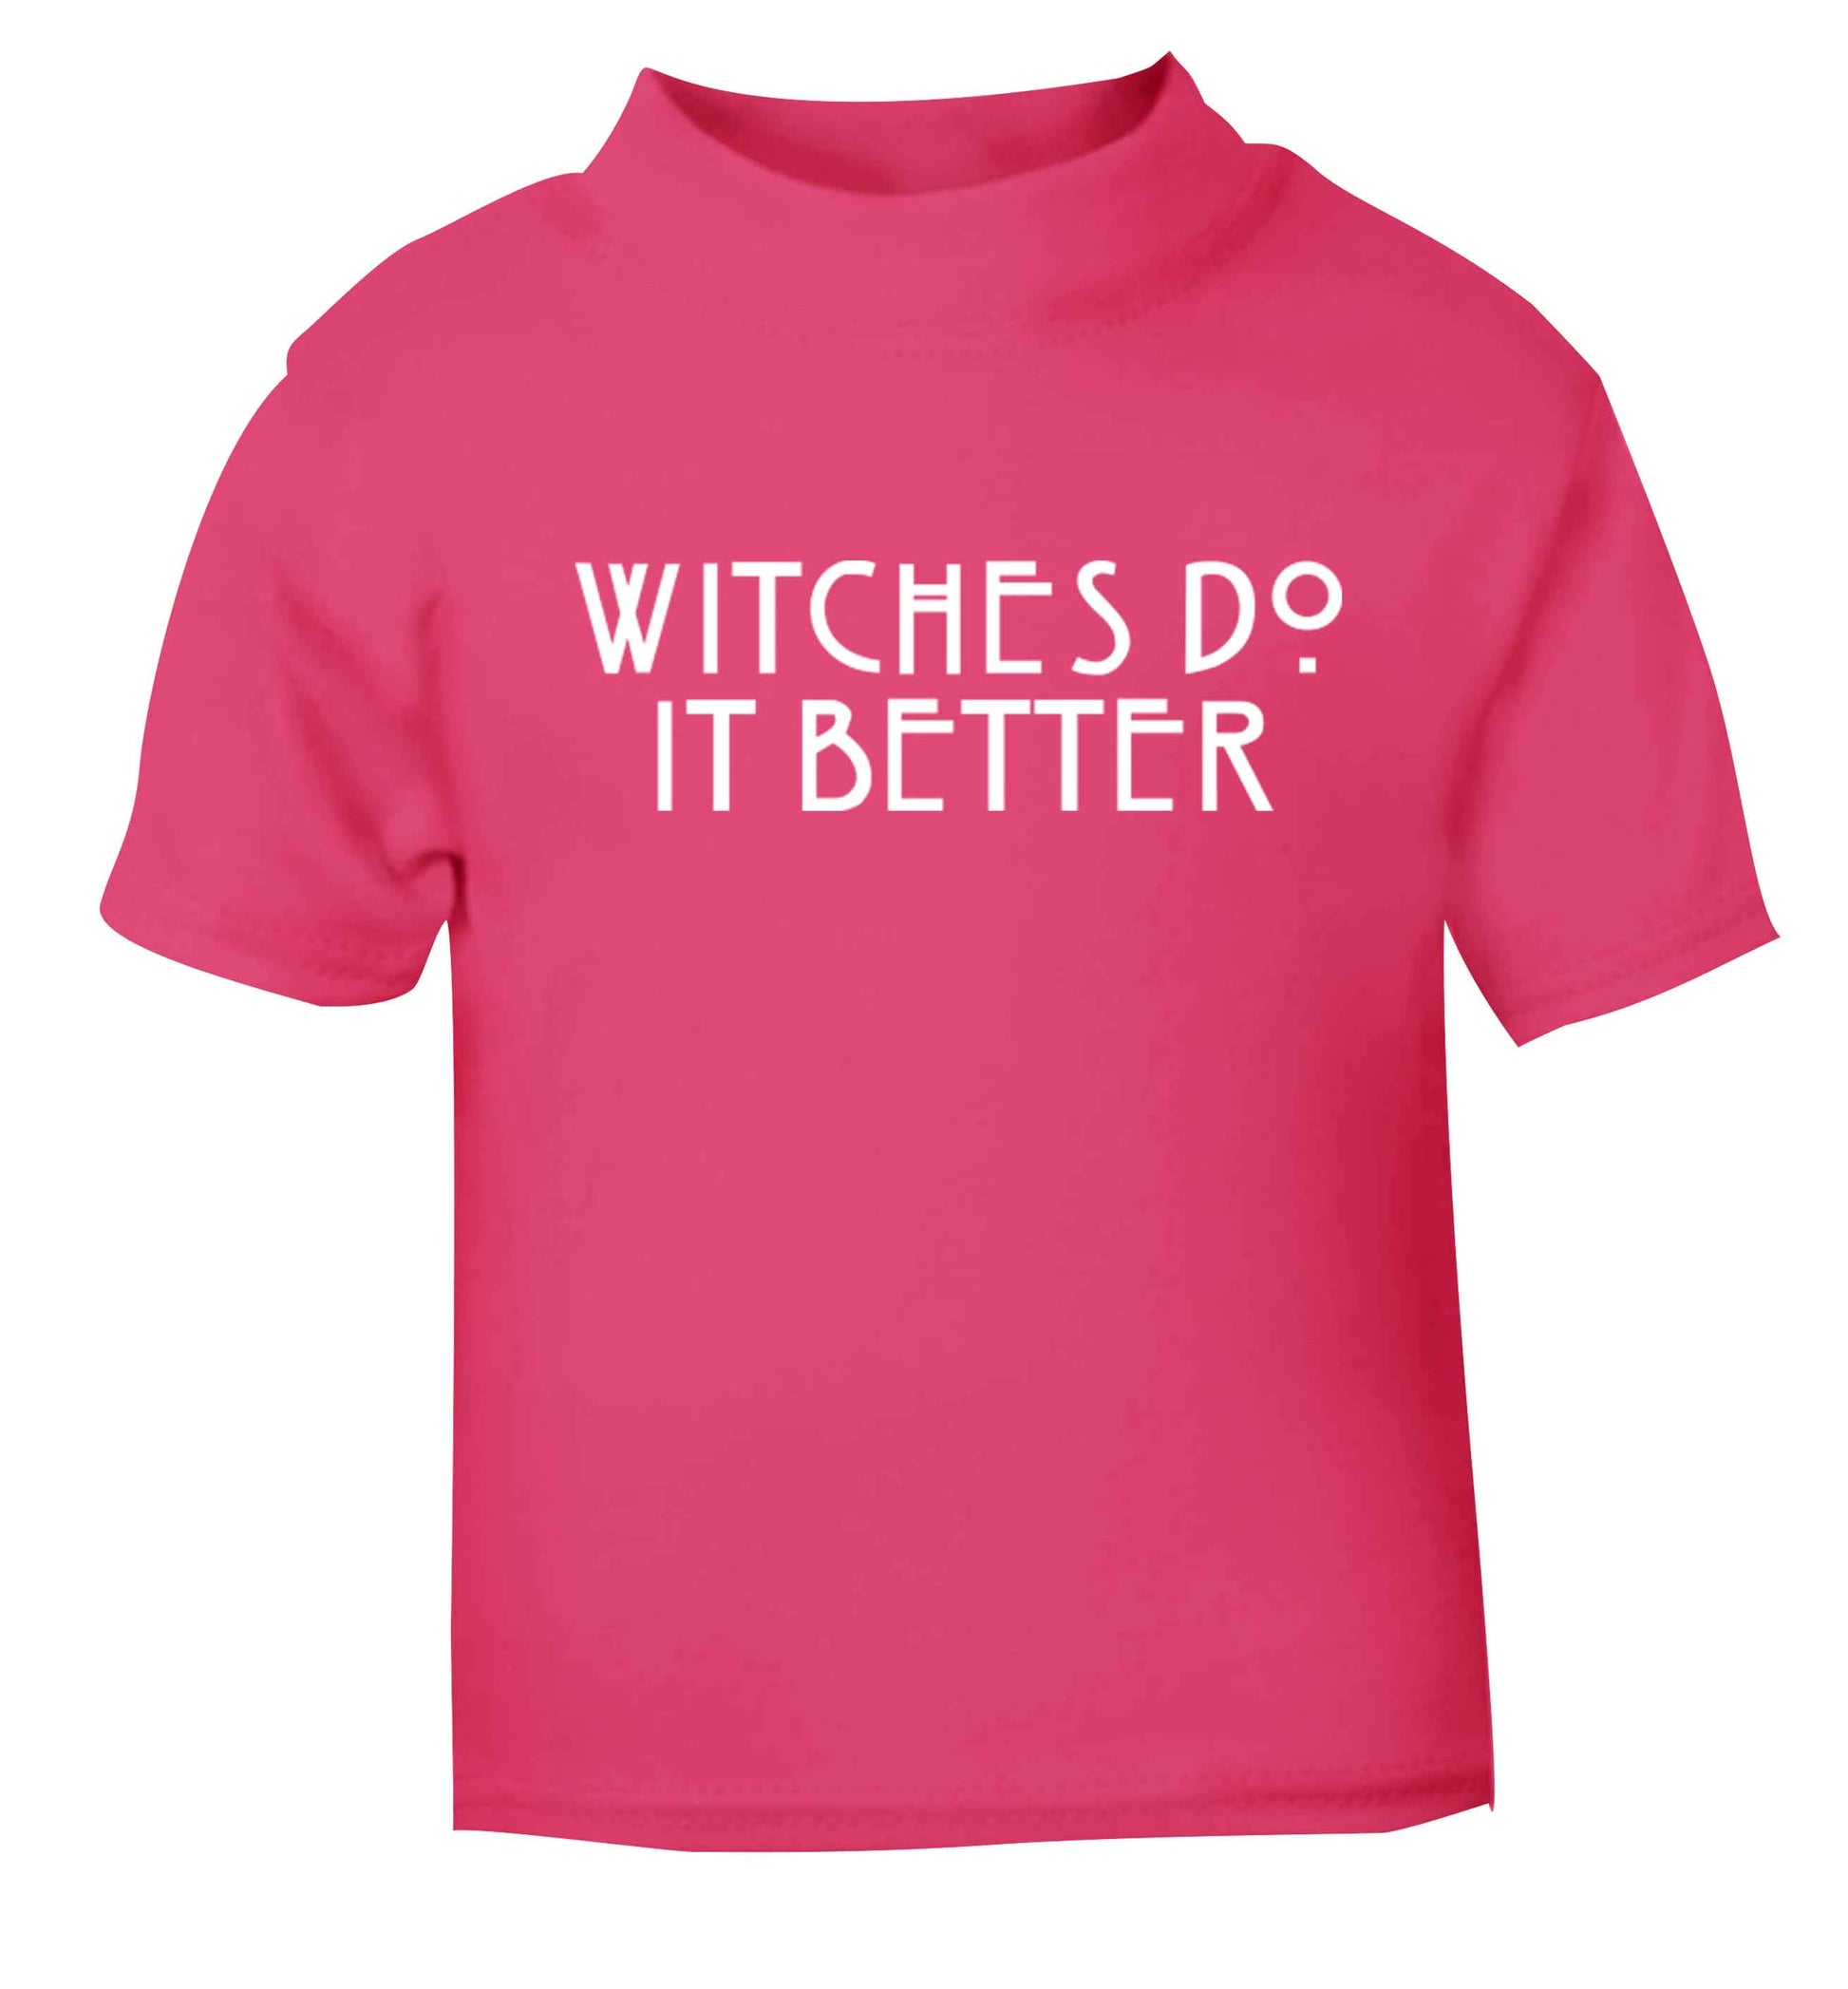 Witches do it better pink baby toddler Tshirt 2 Years